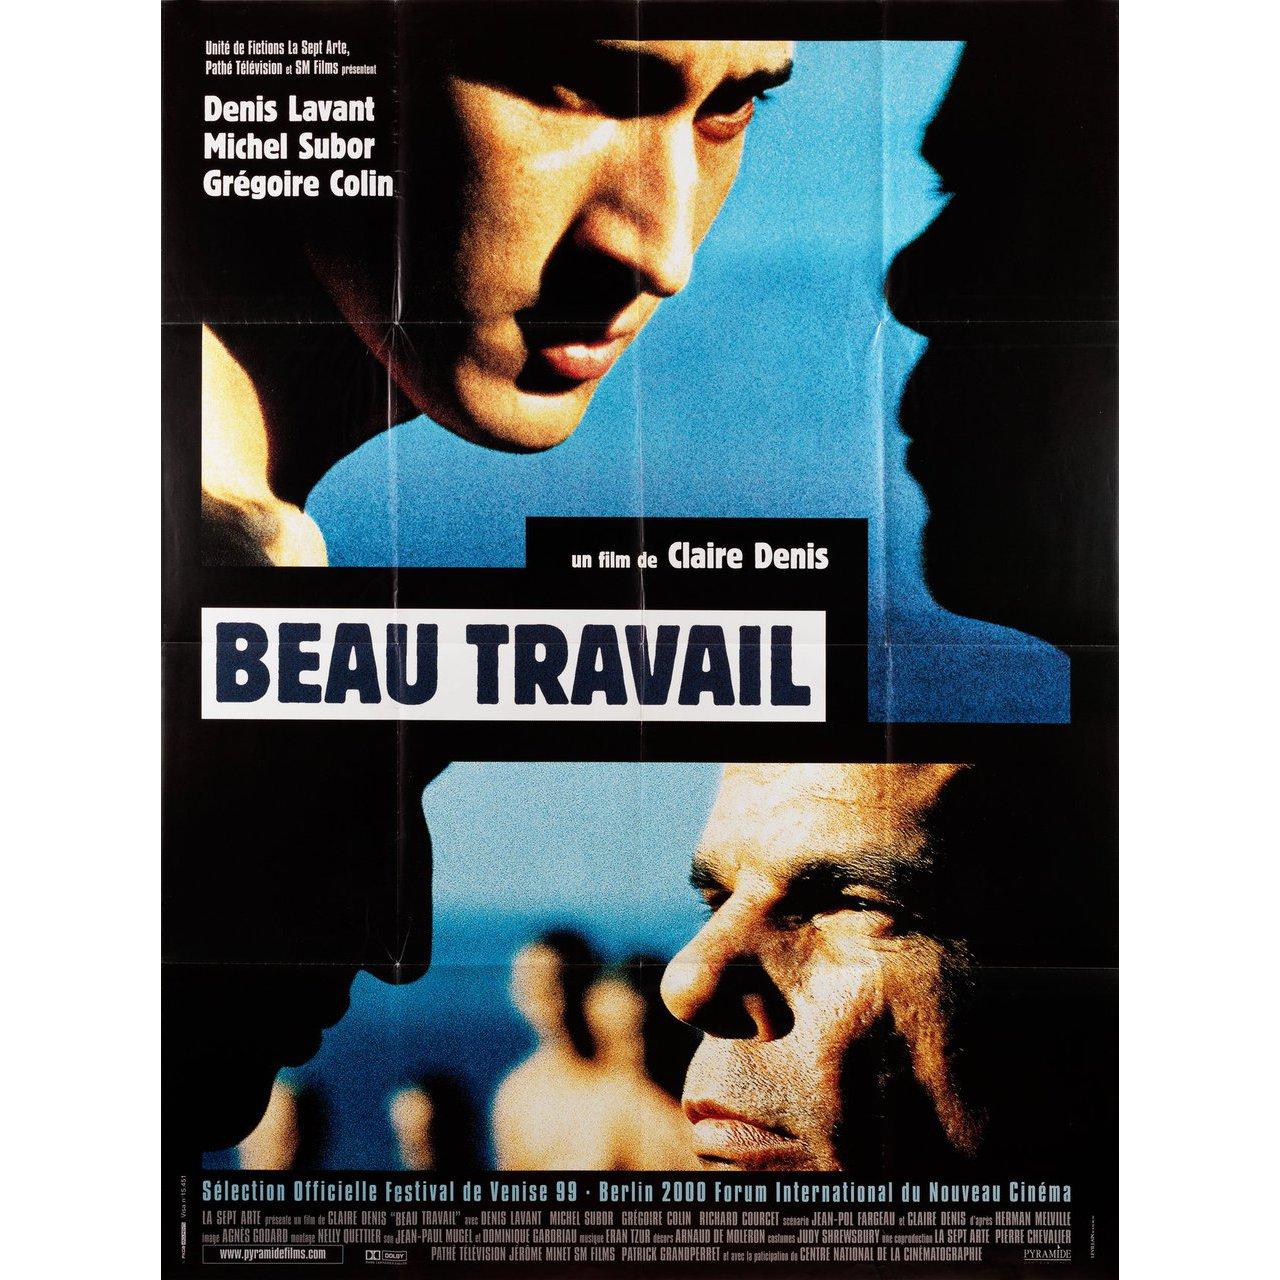 Original 1999 French grande poster for the film Beau travail directed by Claire Denis with Denis Lavant / Michel Subor / Gregoire Colin / Richard Courcet. Very Good-Fine condition, folded. Many original posters were issued folded or were